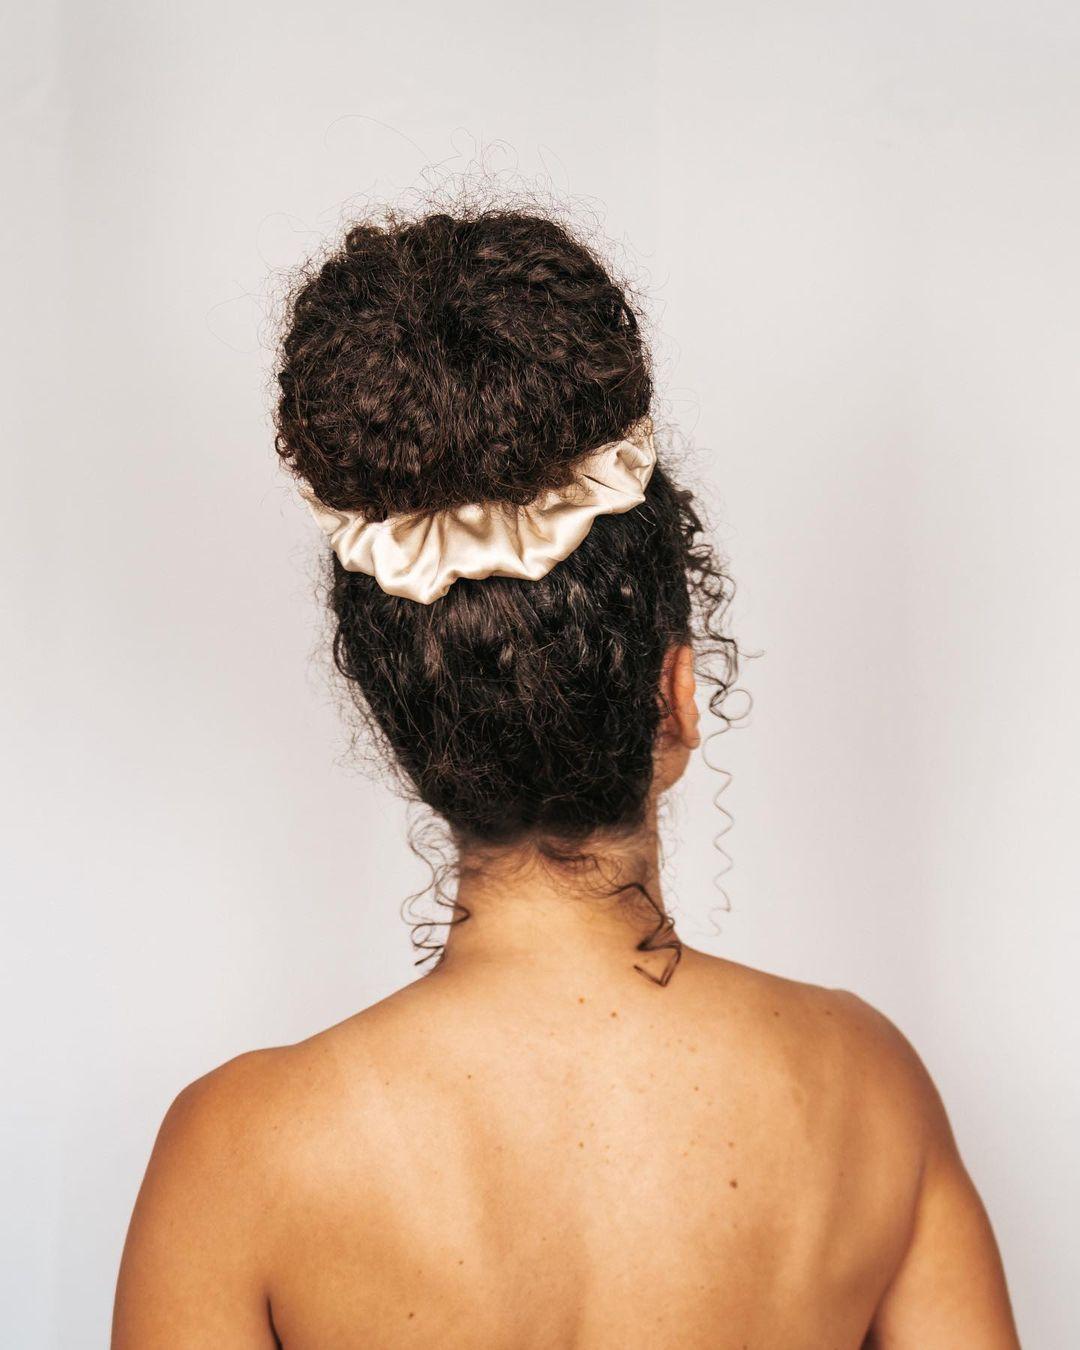 7 Gorgeous Bun Hairstyles Inspired by the #Balletcore Trend